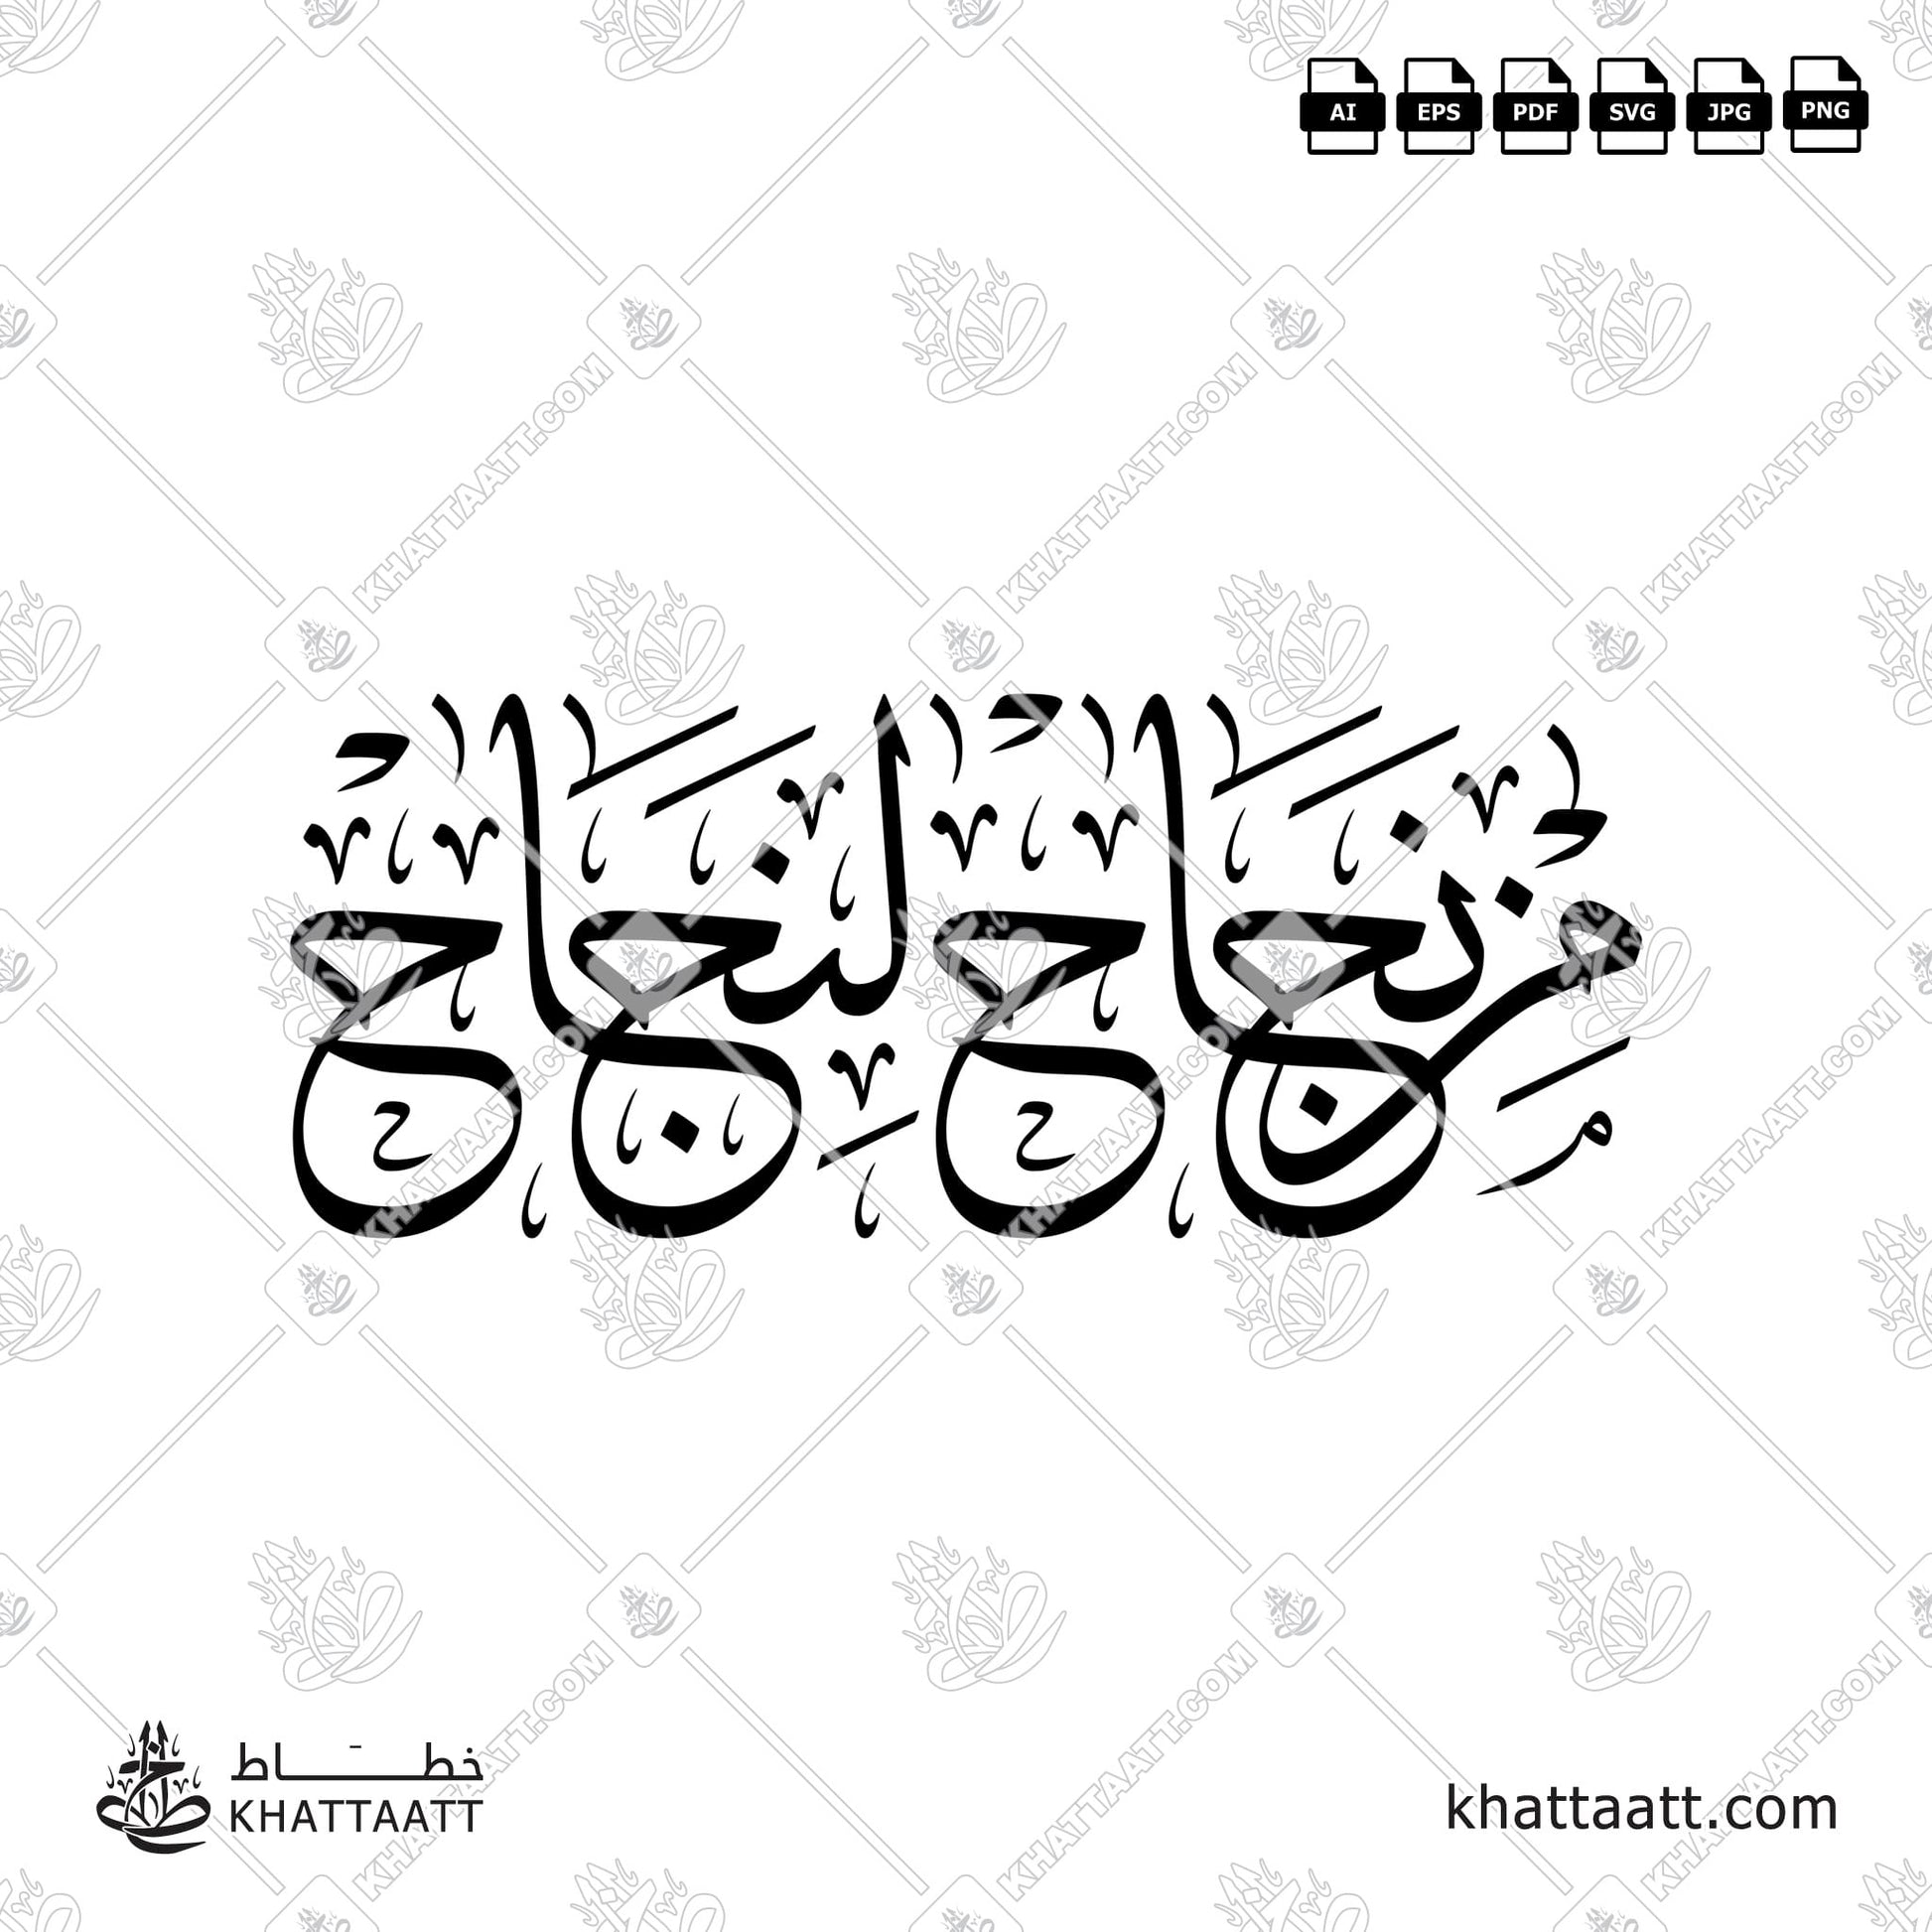 Arabic Calligraphy of "من نجاح لنجاح", translated as: from success to another, in Thuluth Script خط الثلث.